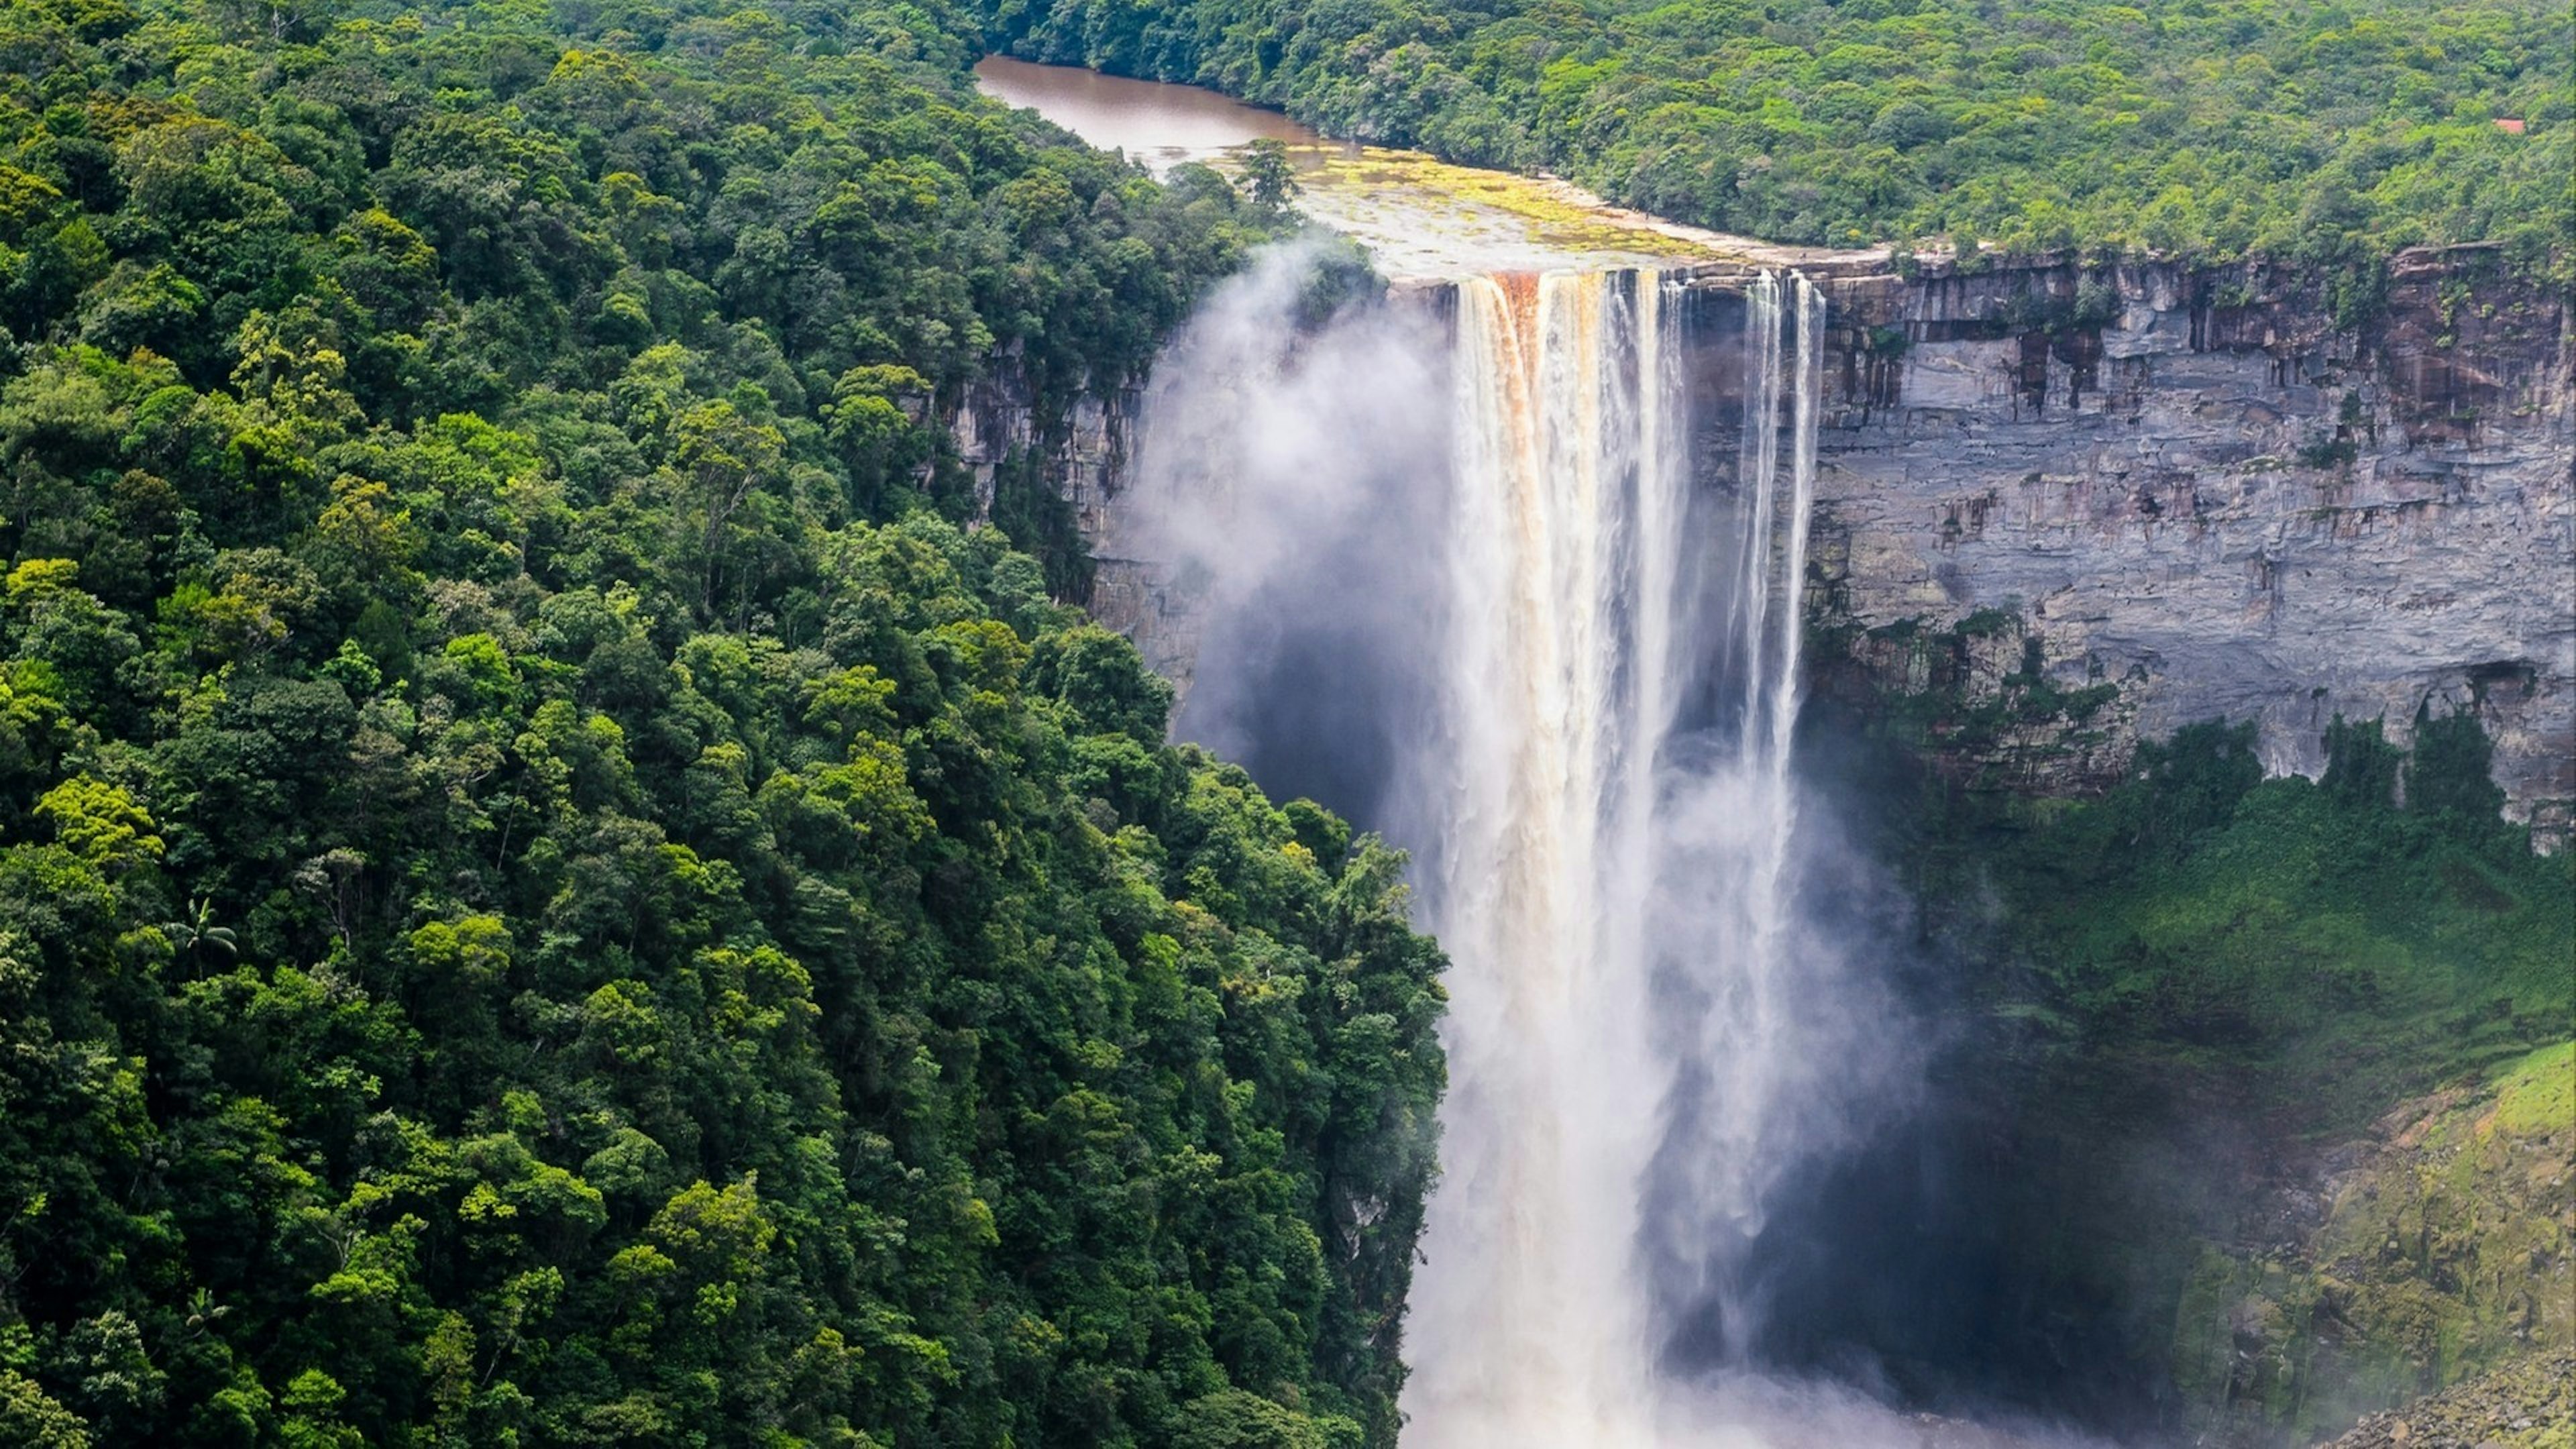 Kaieteur Falls, a waterfall on the Potaro River in central Essequibo Territory